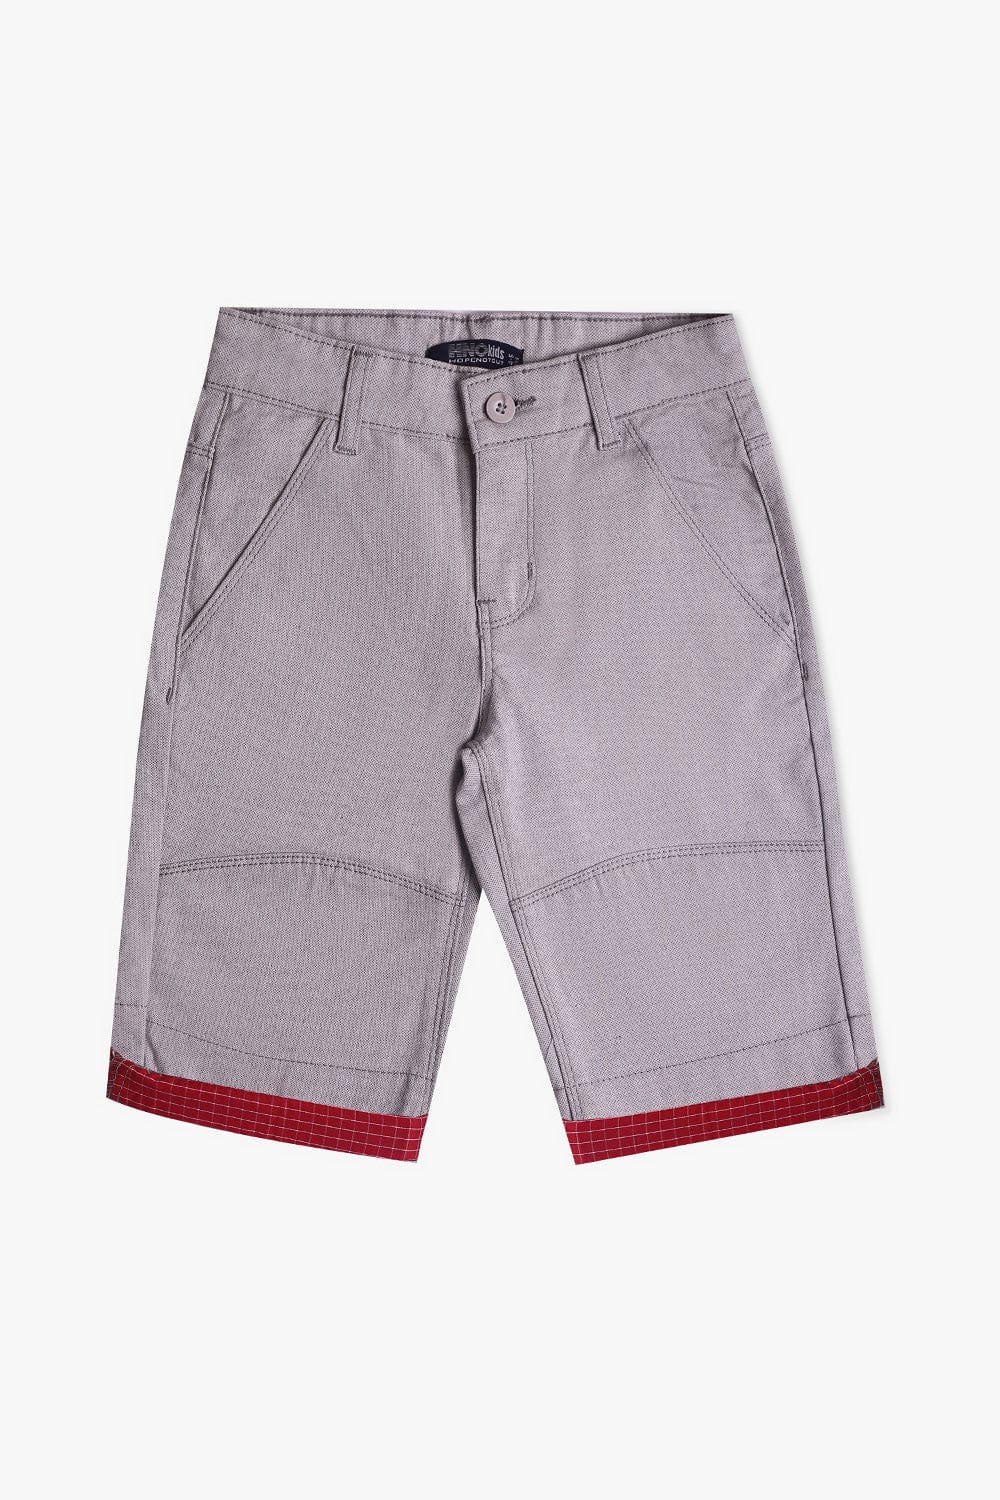 Hope Not Out by Shahid Afridi Boys Denim Shorts Denim Shorts with Contrast Bottom